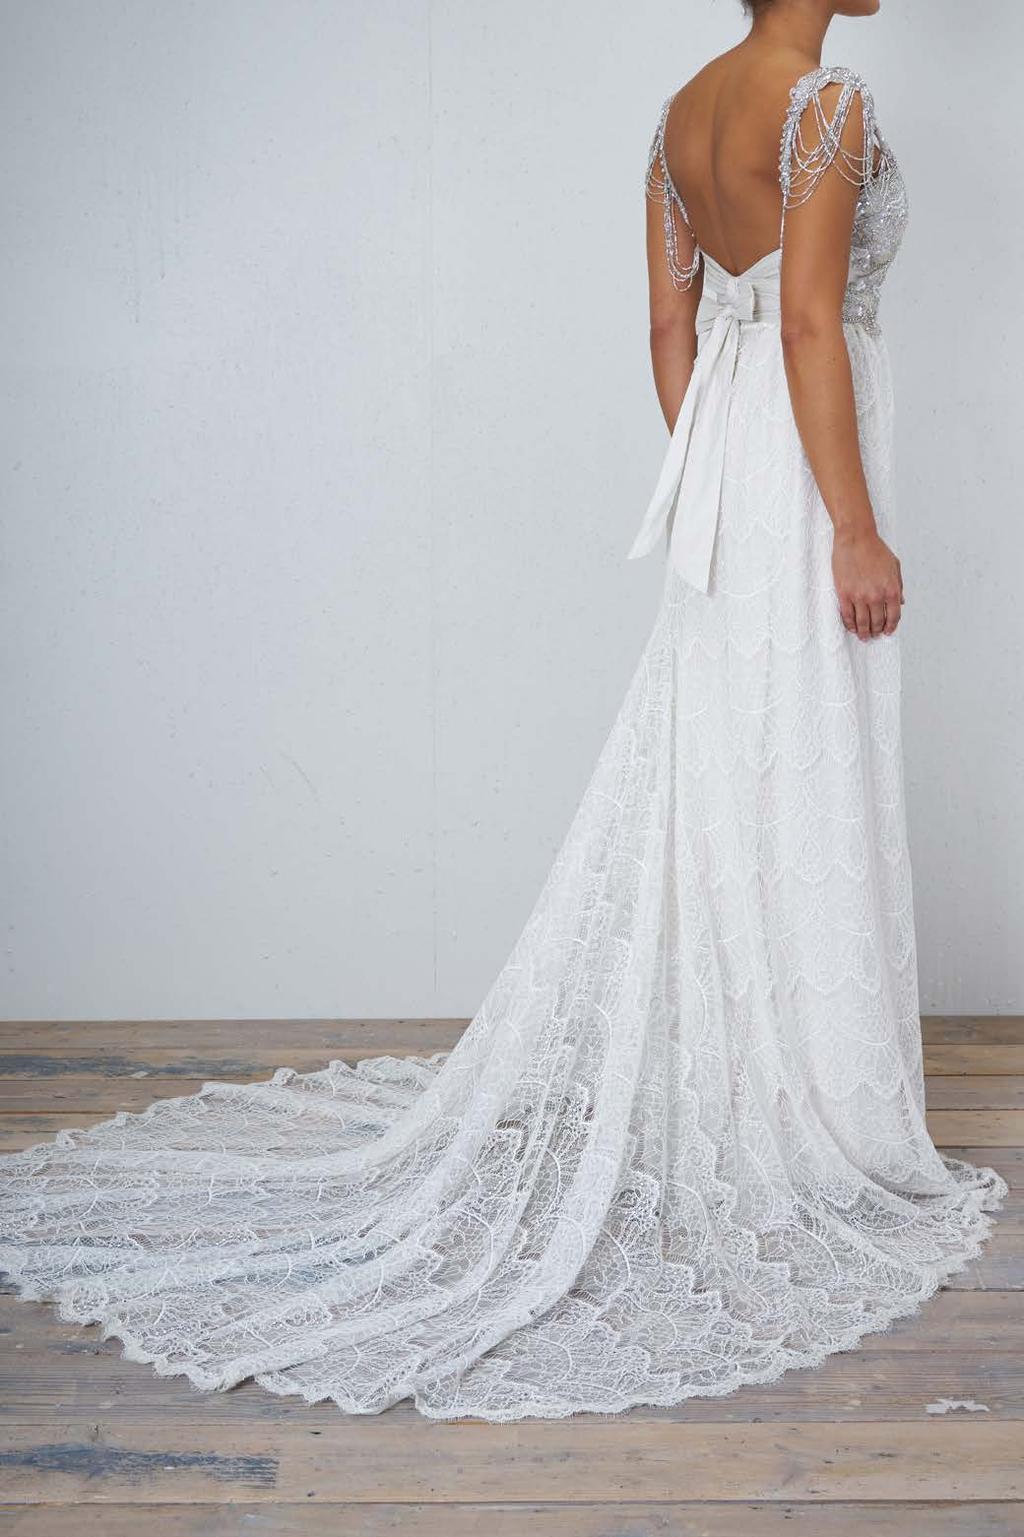 Paired beautifully with either a lace or embellished bodice, the relaxed elegance